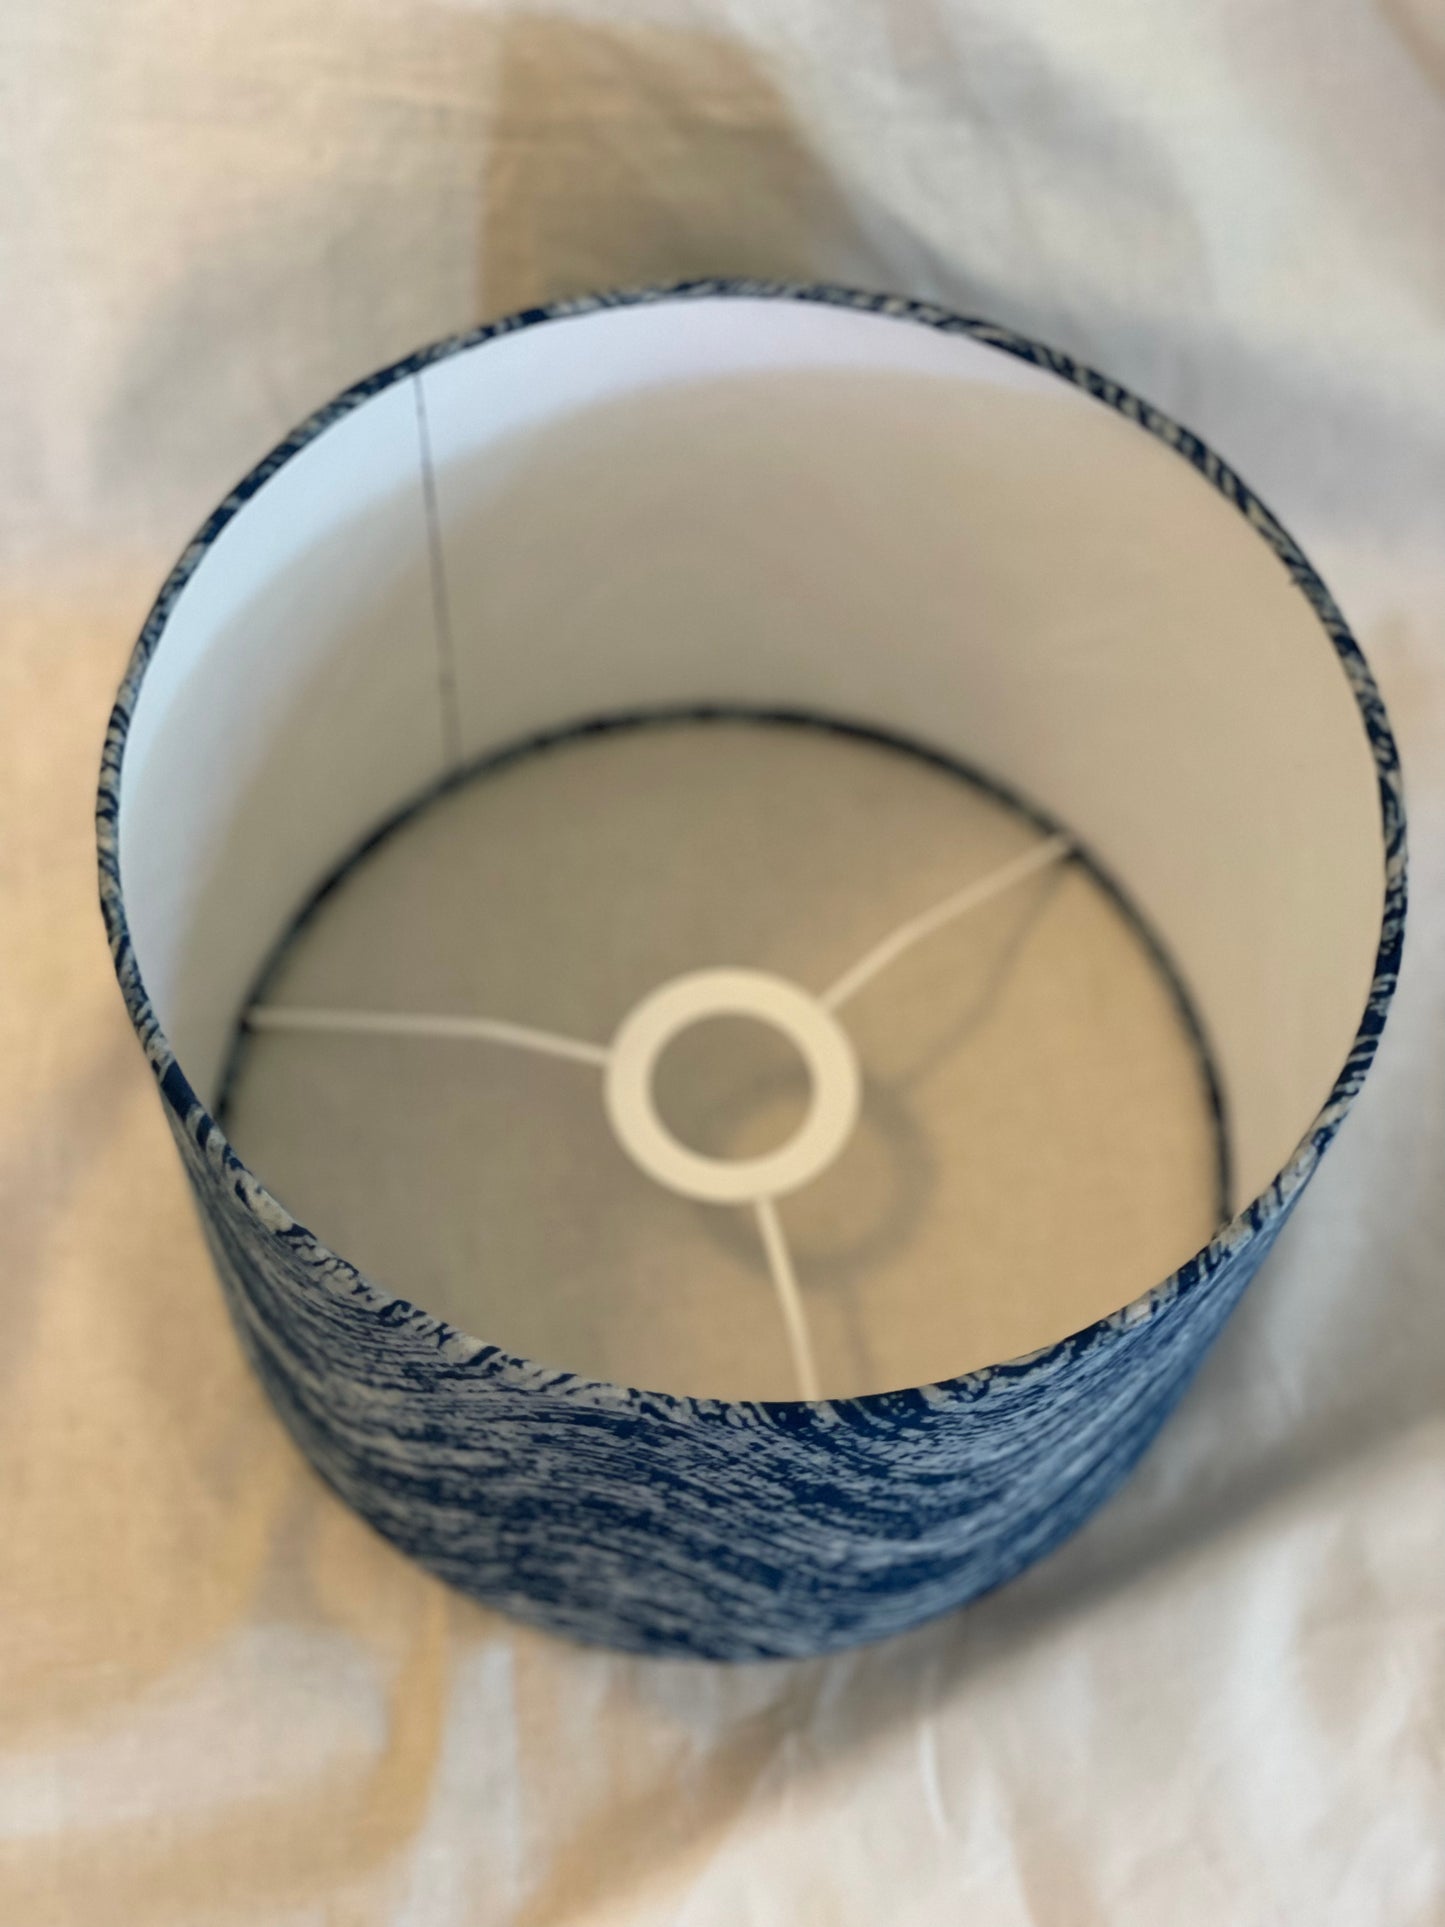 10 inch Drum Lampshade. Indigo Batik from India. Blue and White Wavy Combed Pattern.